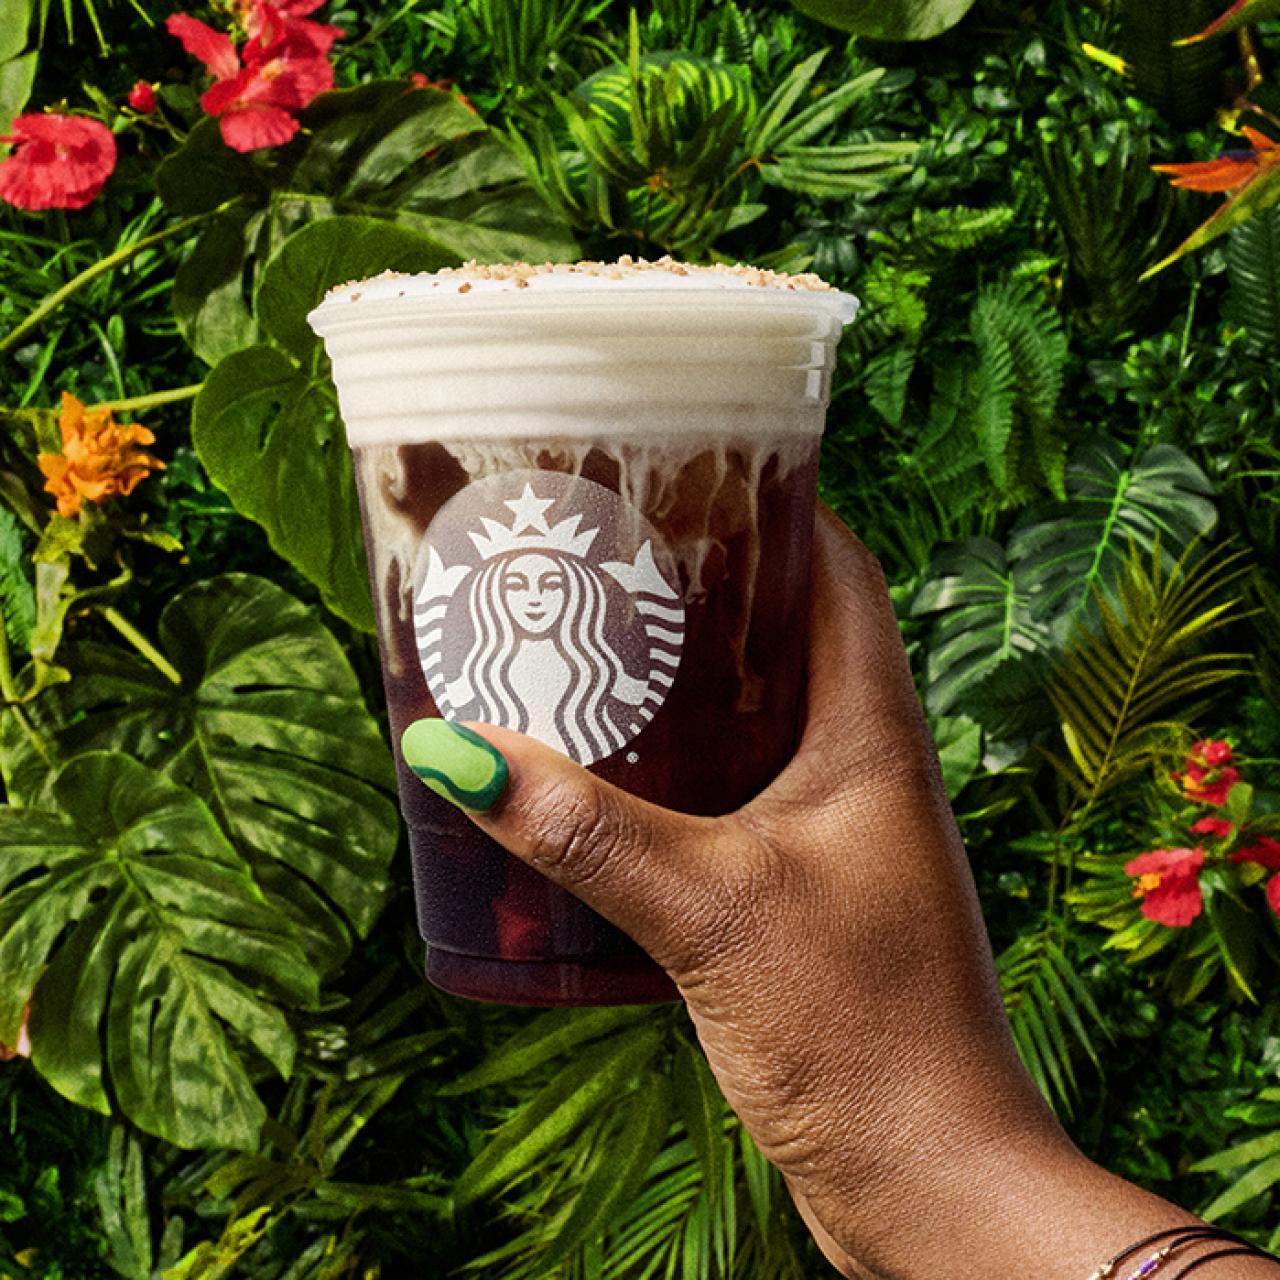 Starbucks Is Releasing 3 New Summer Drinks, But Only for a Limited Time